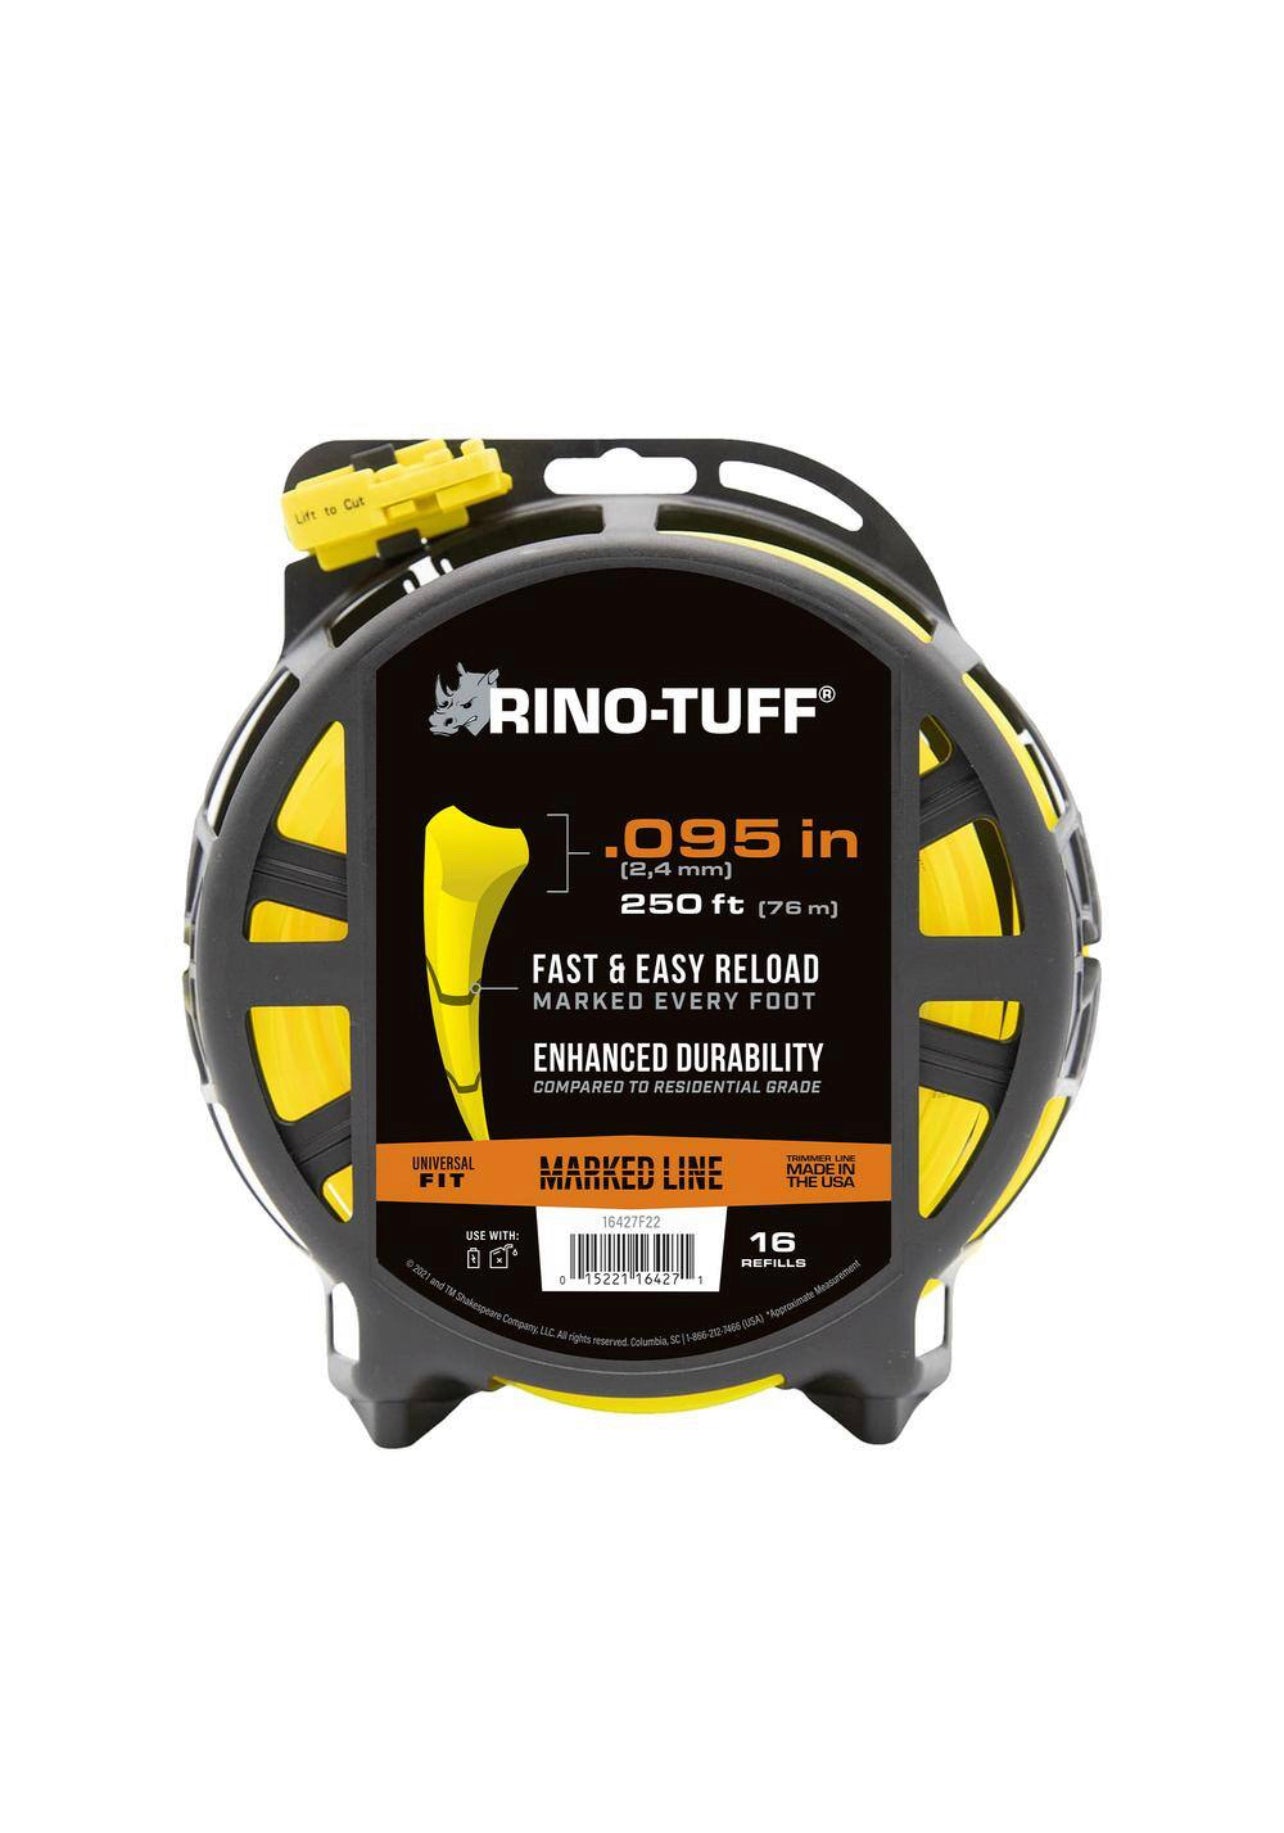 Rhino Tuff Universal Fit .095 in. x 250 ft. Pro Marked Replacement Line for Gas and Select Cordless String Grass Trimmer/Lawn Edger